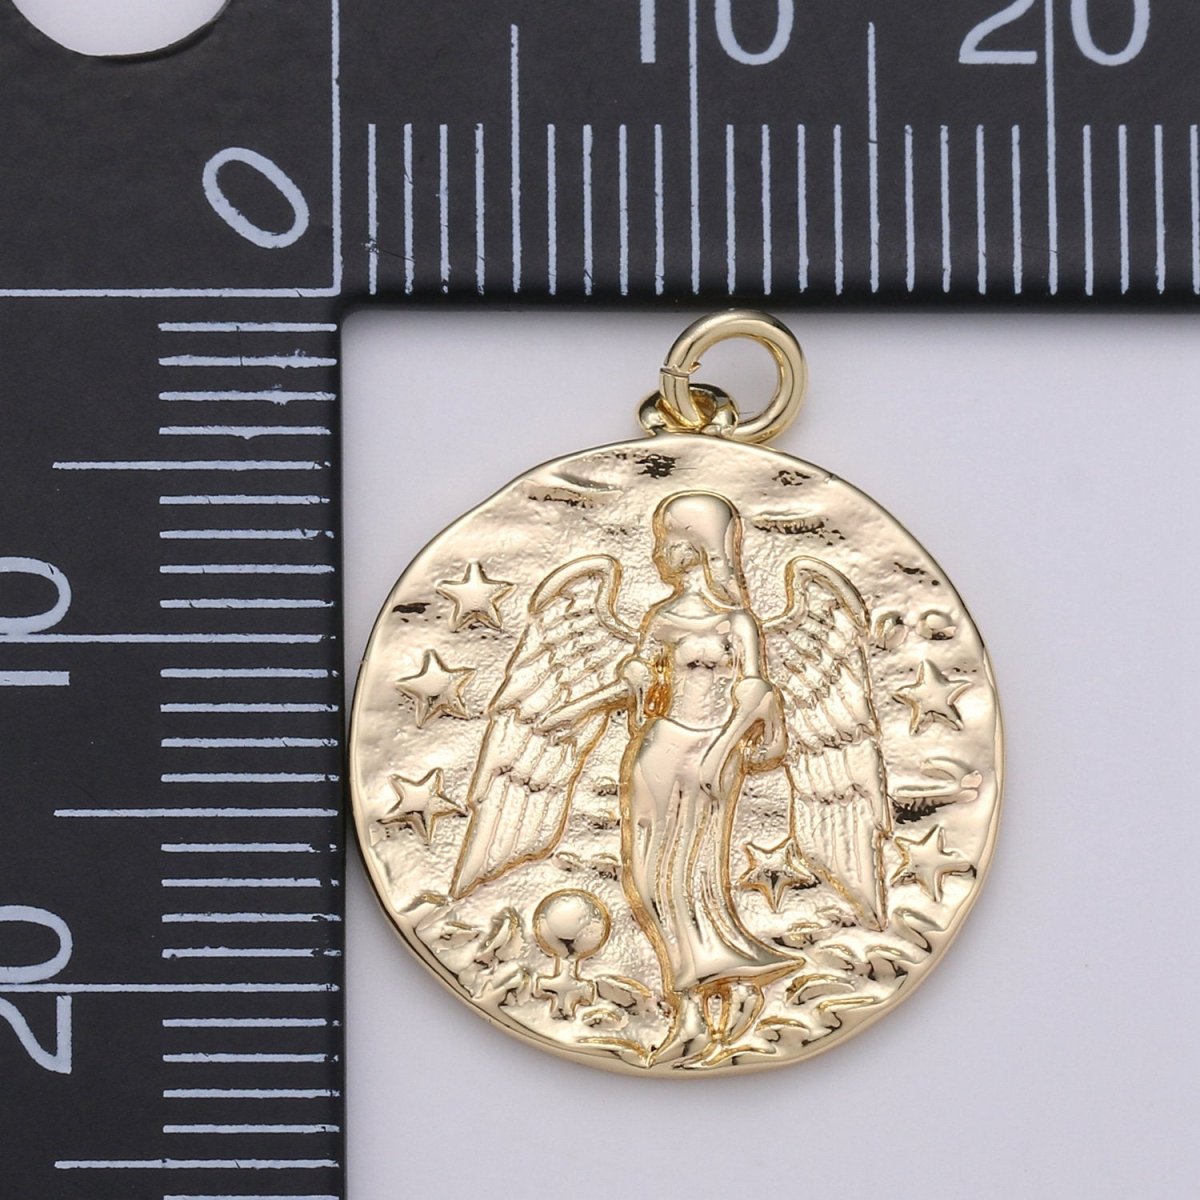 Rustic Coin Charm 14k Gold Filled coin pendant, Medallion charms Angel coin charms, Vintage Disc Charm for Necklace Bracelet Earring D-391 - DLUXCA